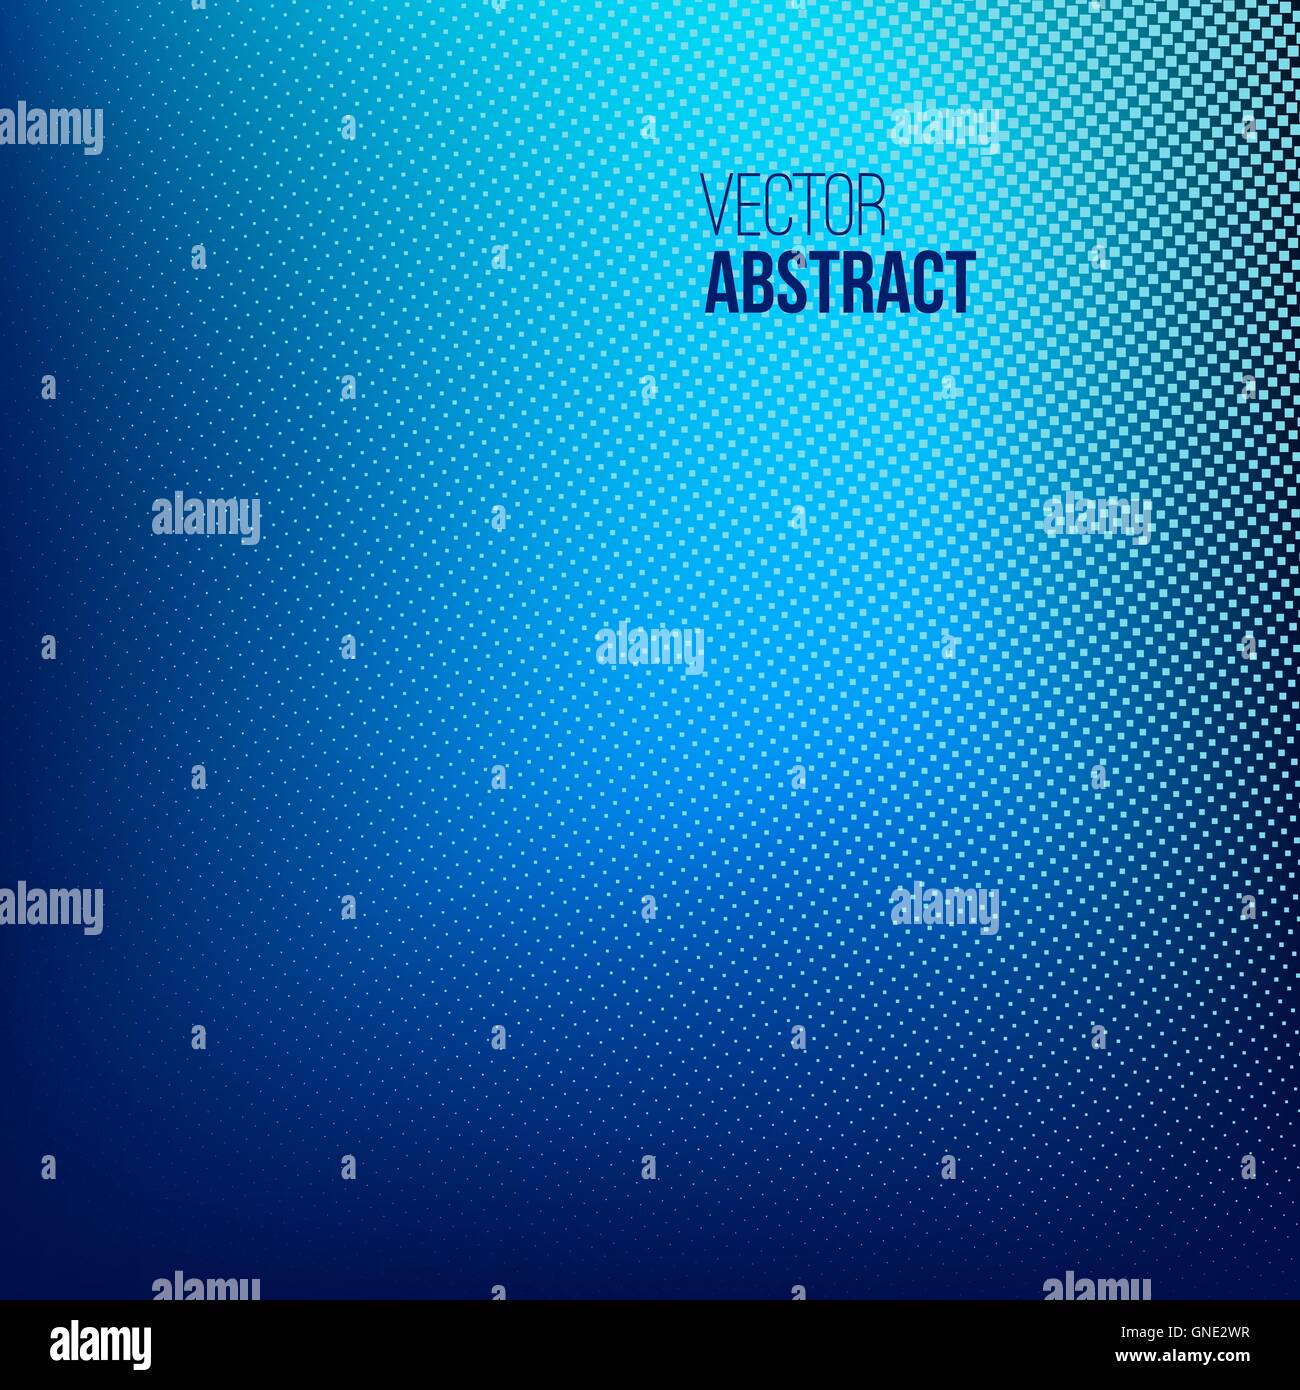 Abstract Halftone Background Stock Vector